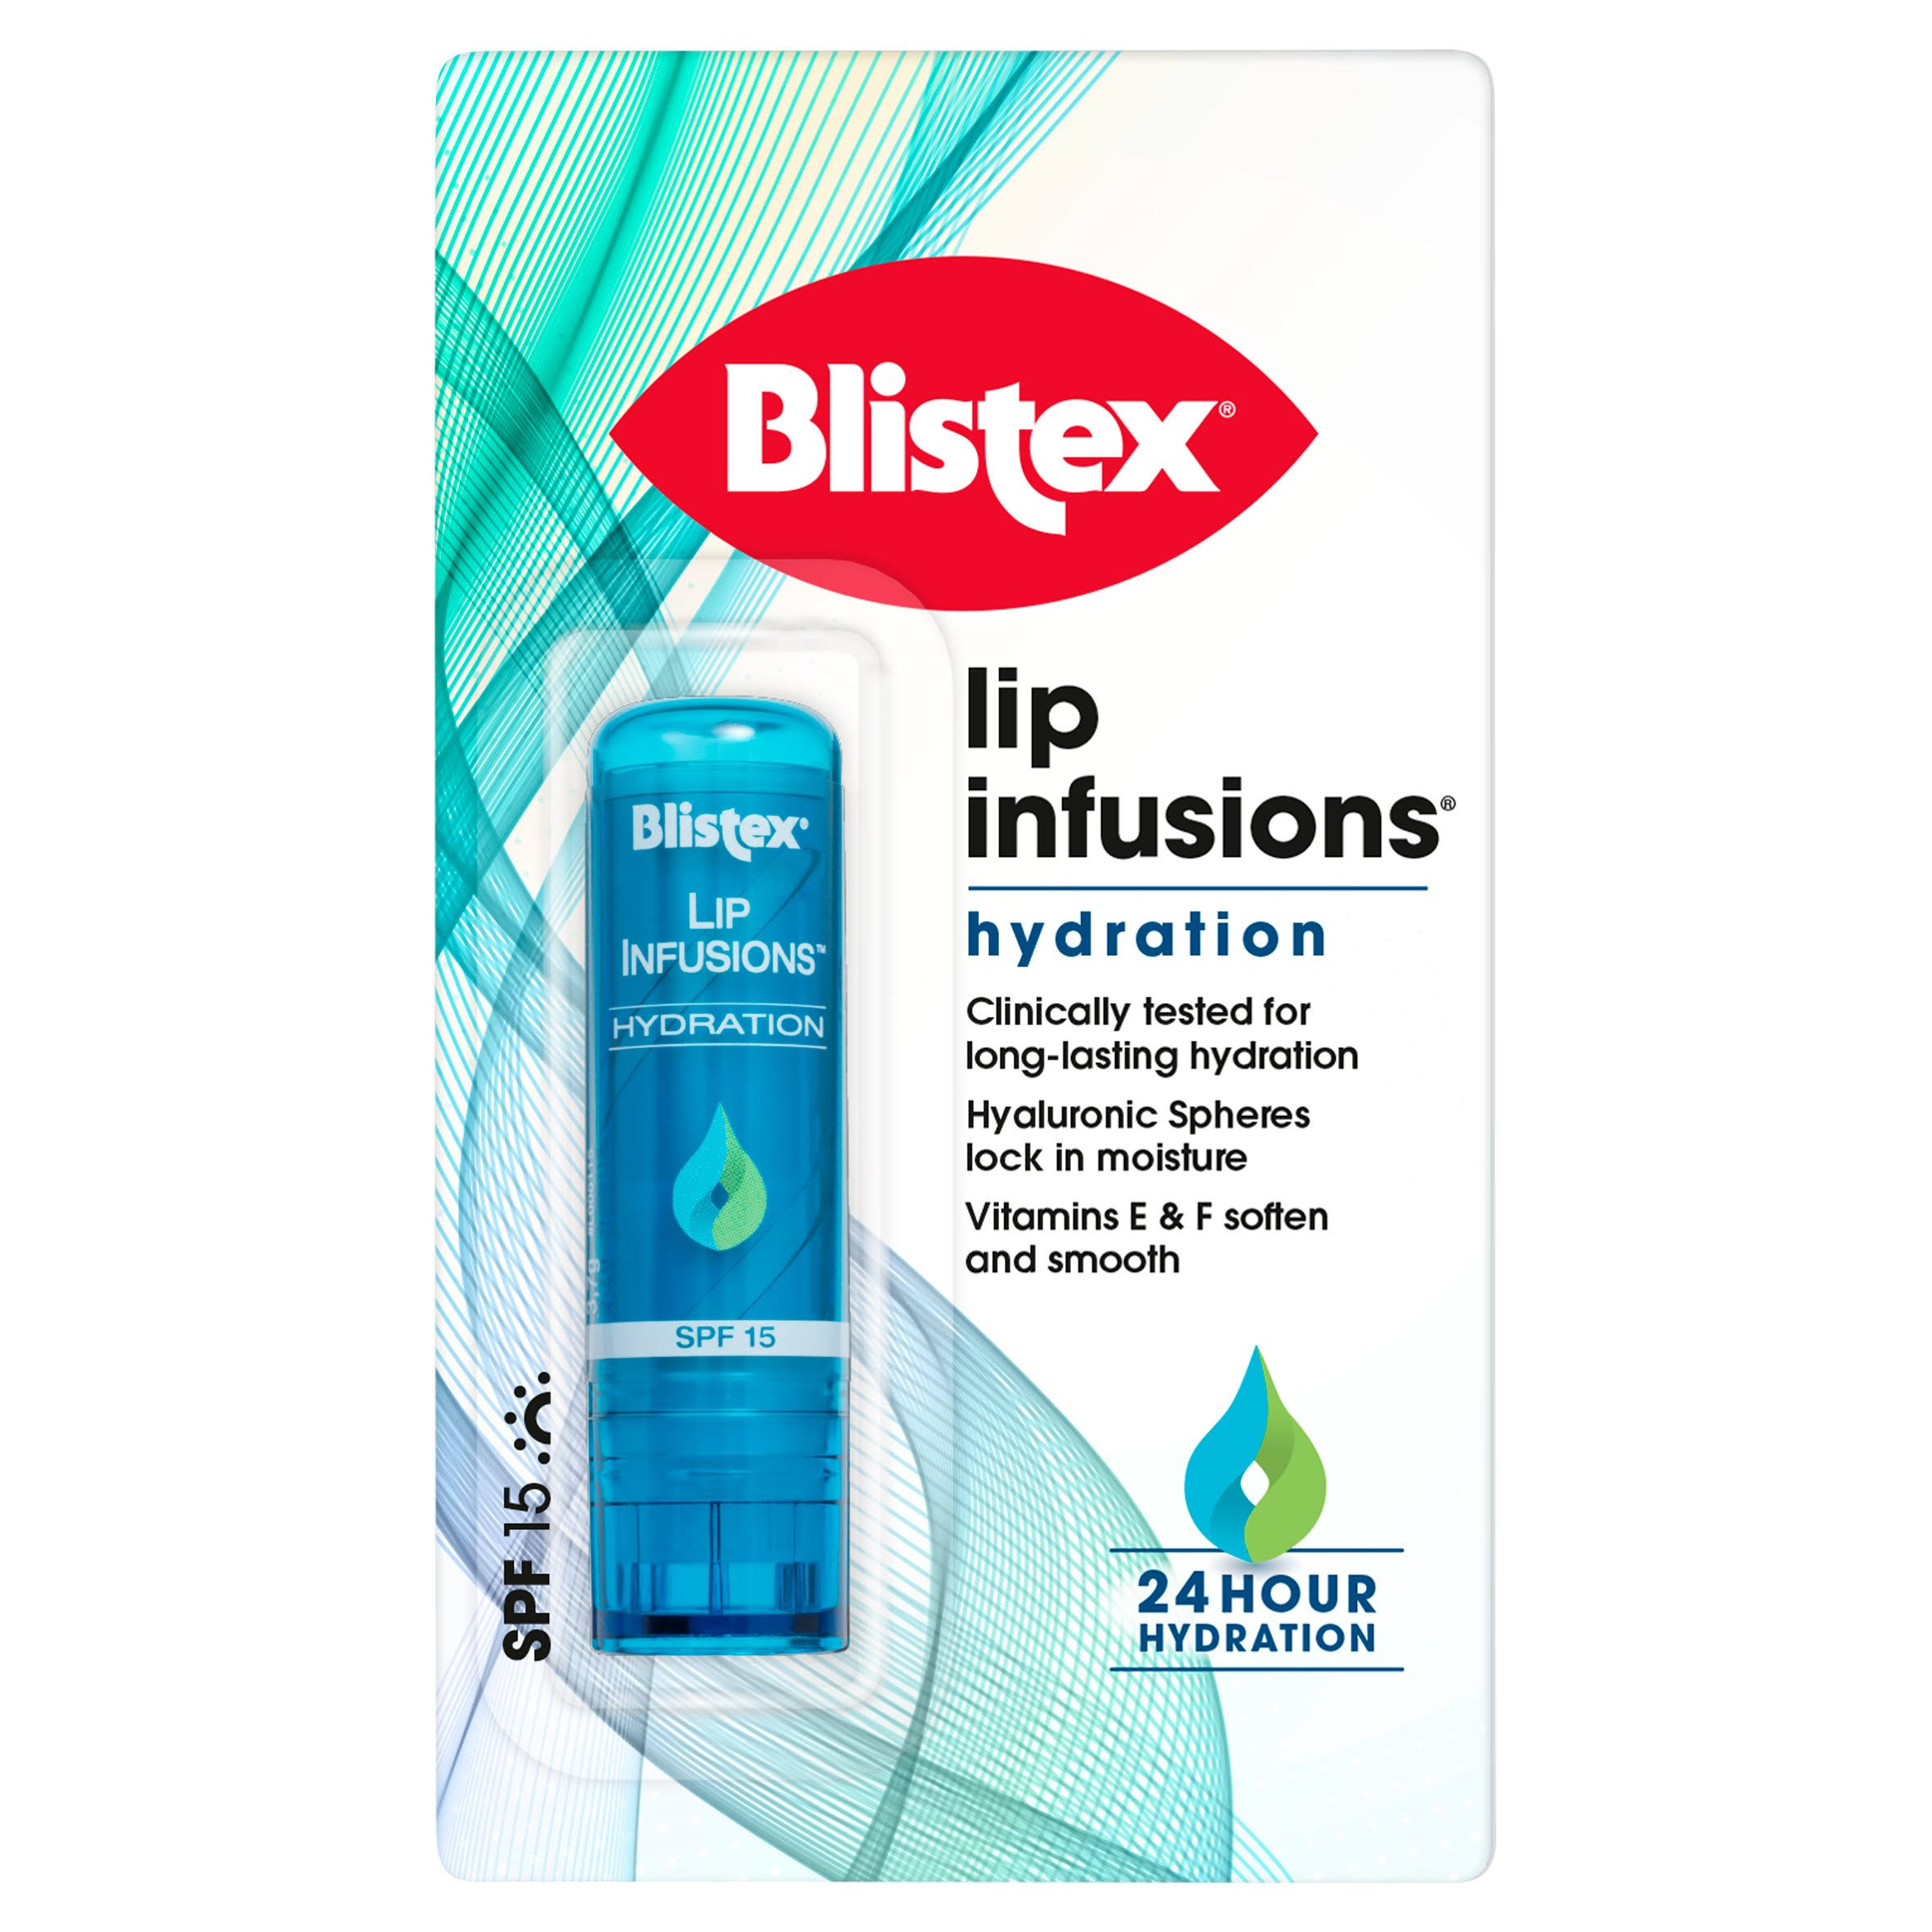 Blistex Lip Infusions Hydrating 3g by dpharmacy